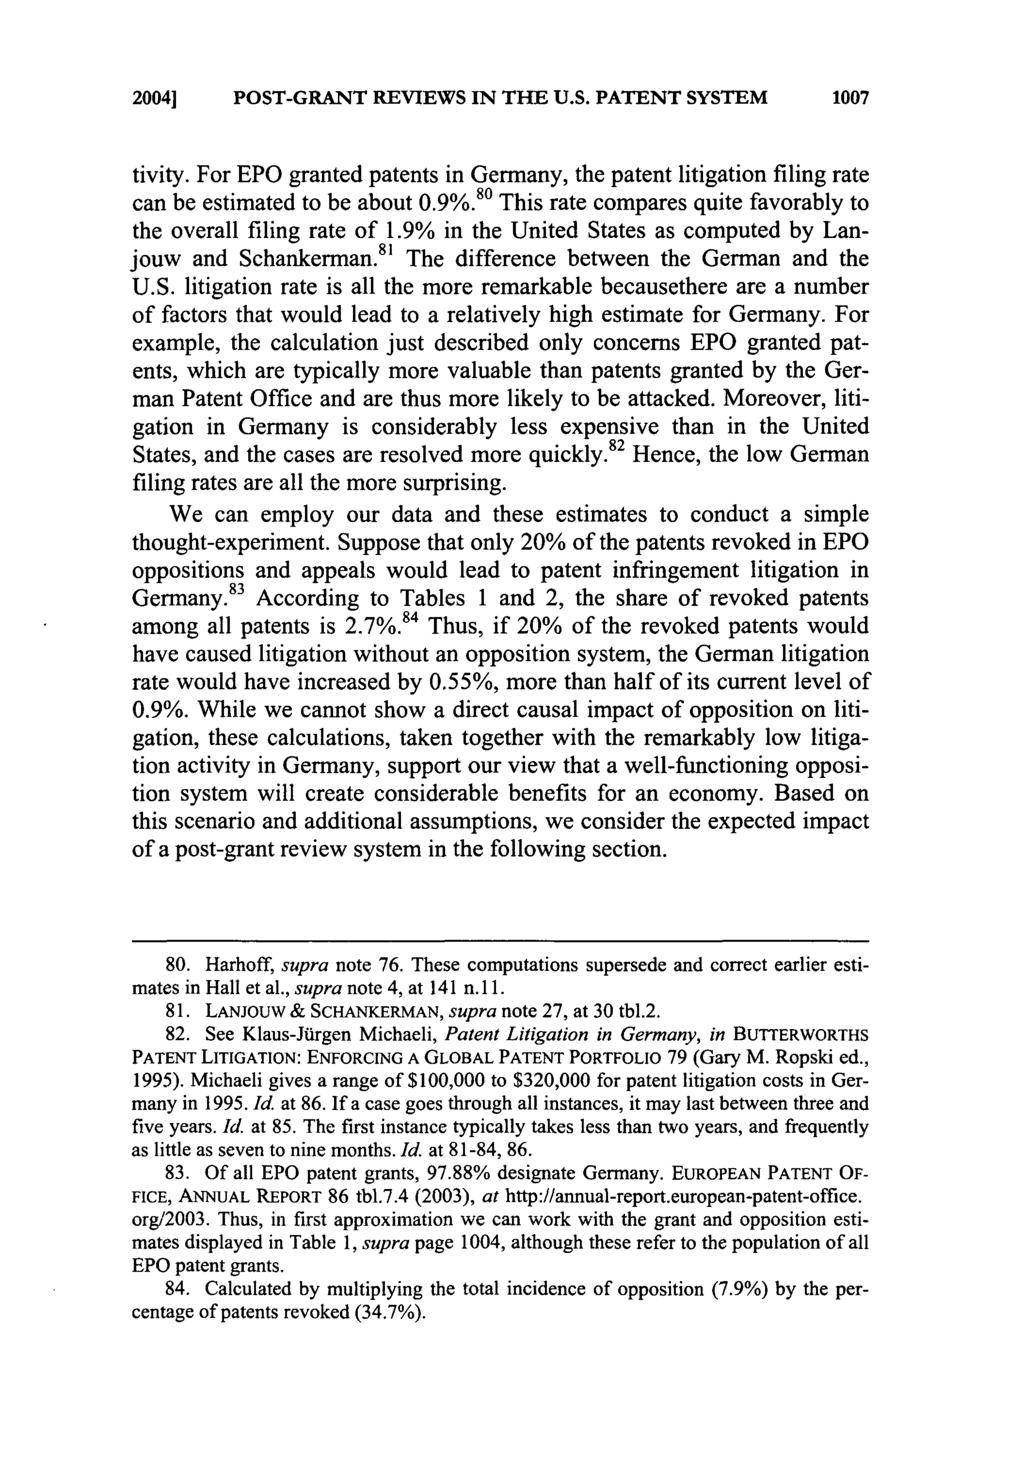 2004] POST-GRANT REVIEWS IN THE U.S. PATENT SYSTEM 1007 tivity. For EPO granted patents in Germany, the patent litigation filing rate can be estimated to be about 0.9%.